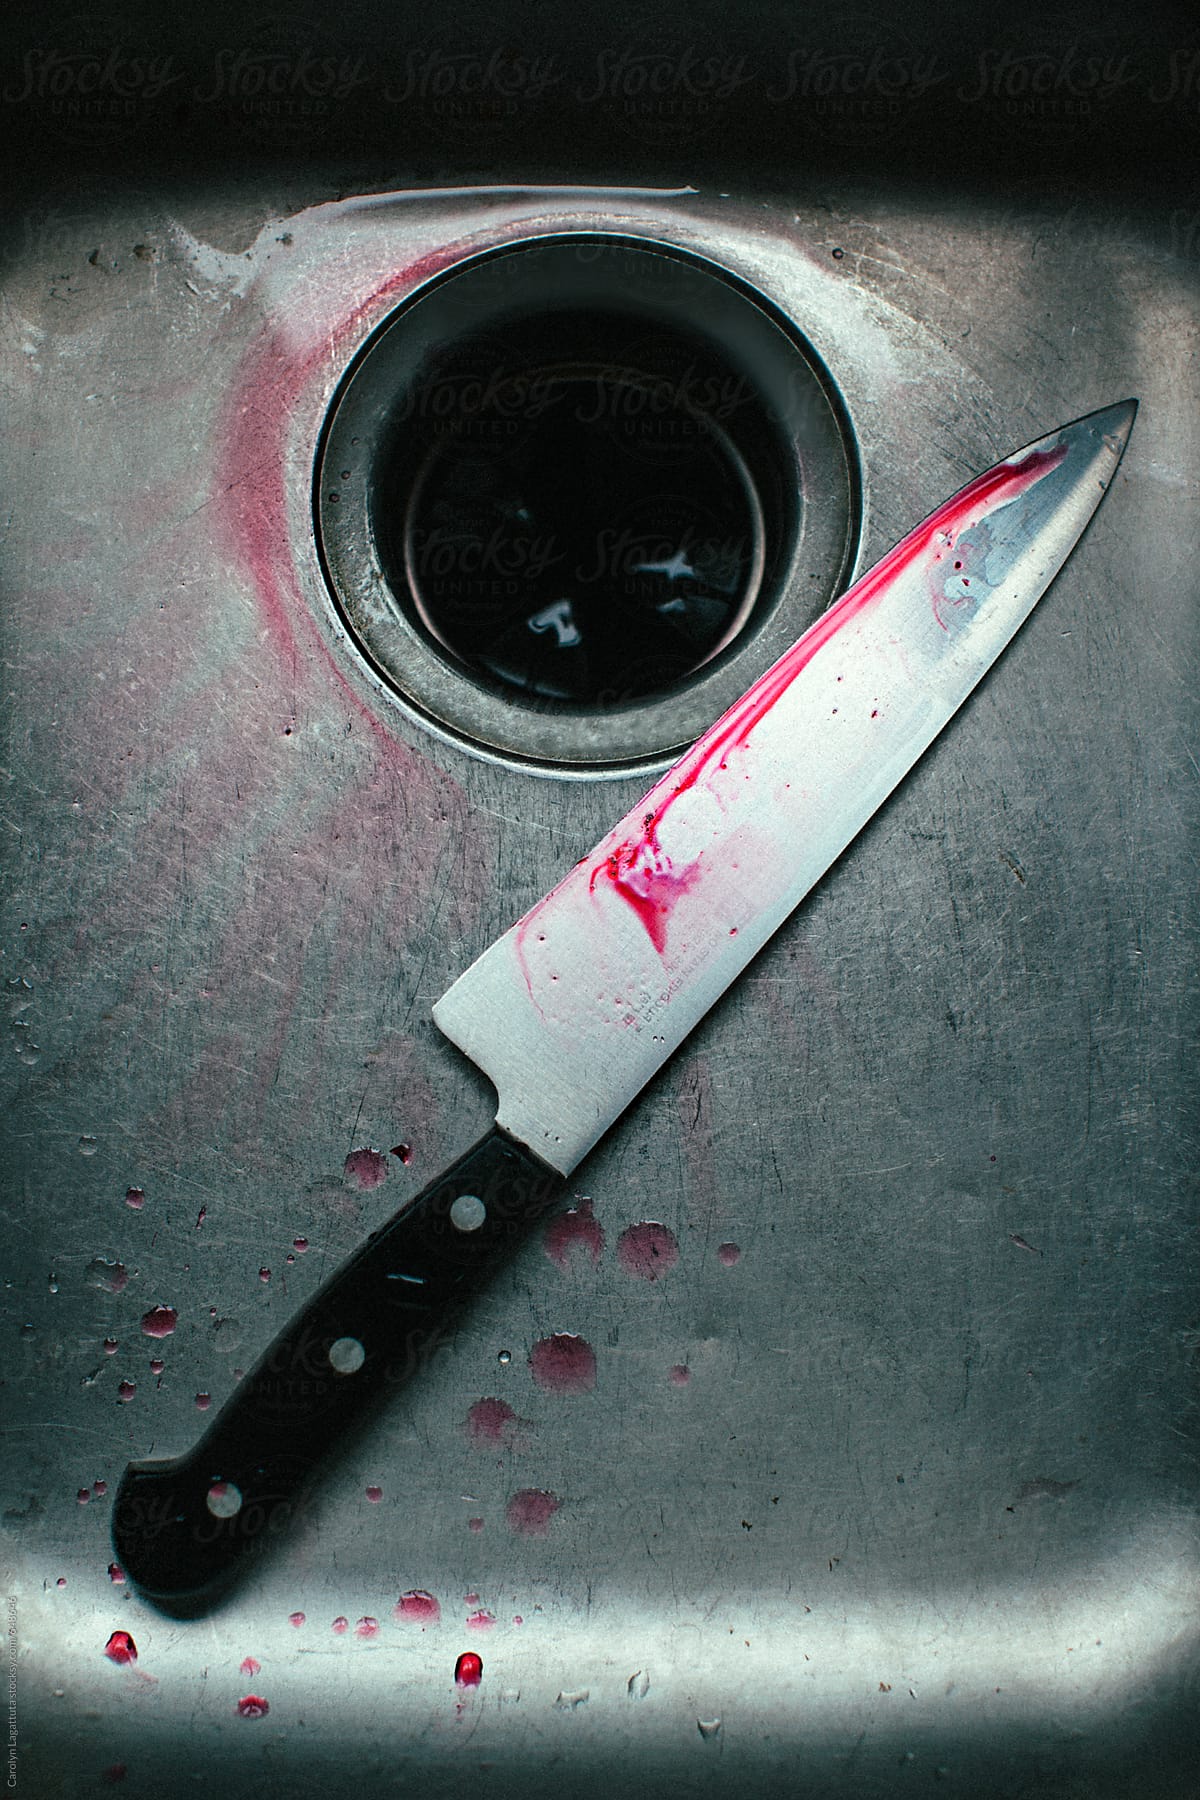 Bloody knife in the sink